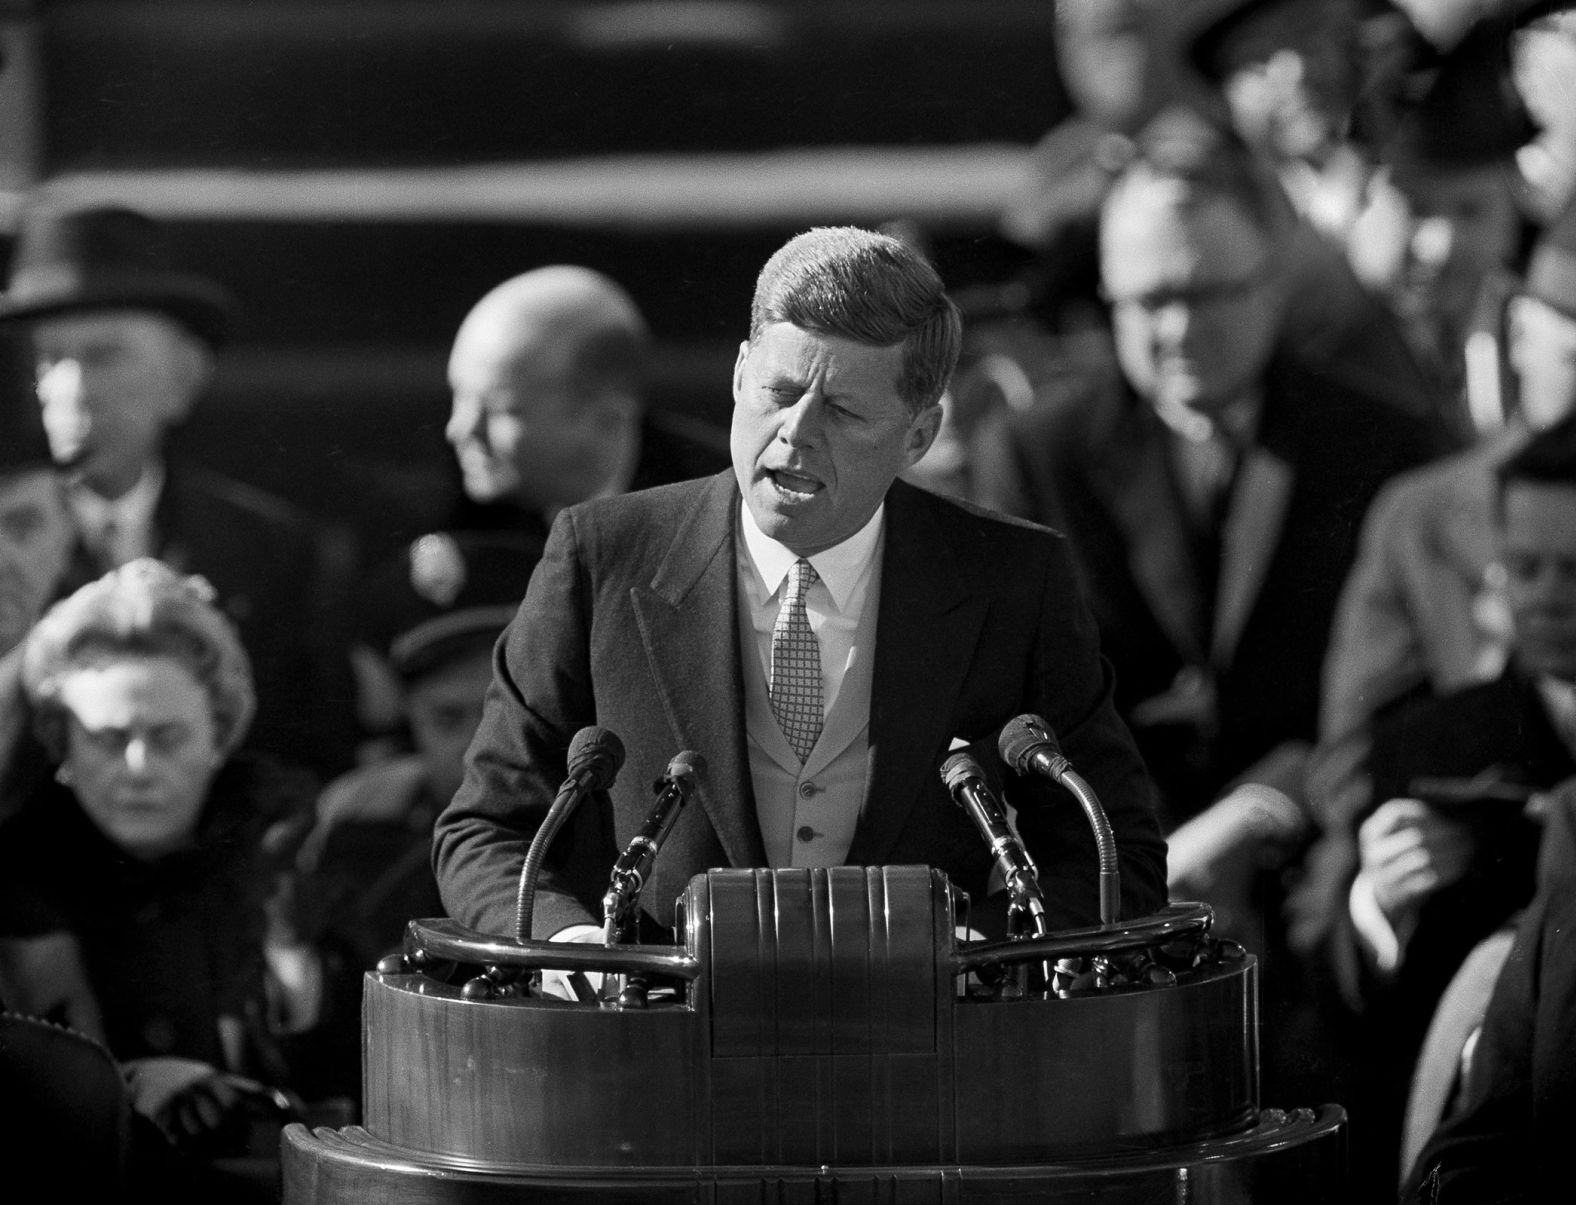 Kennedy delivers his inaugural address in January 1961. It was here where he delivered one of his most famous lines: "Ask not what your country can do for you -- ask what you can do for your country."